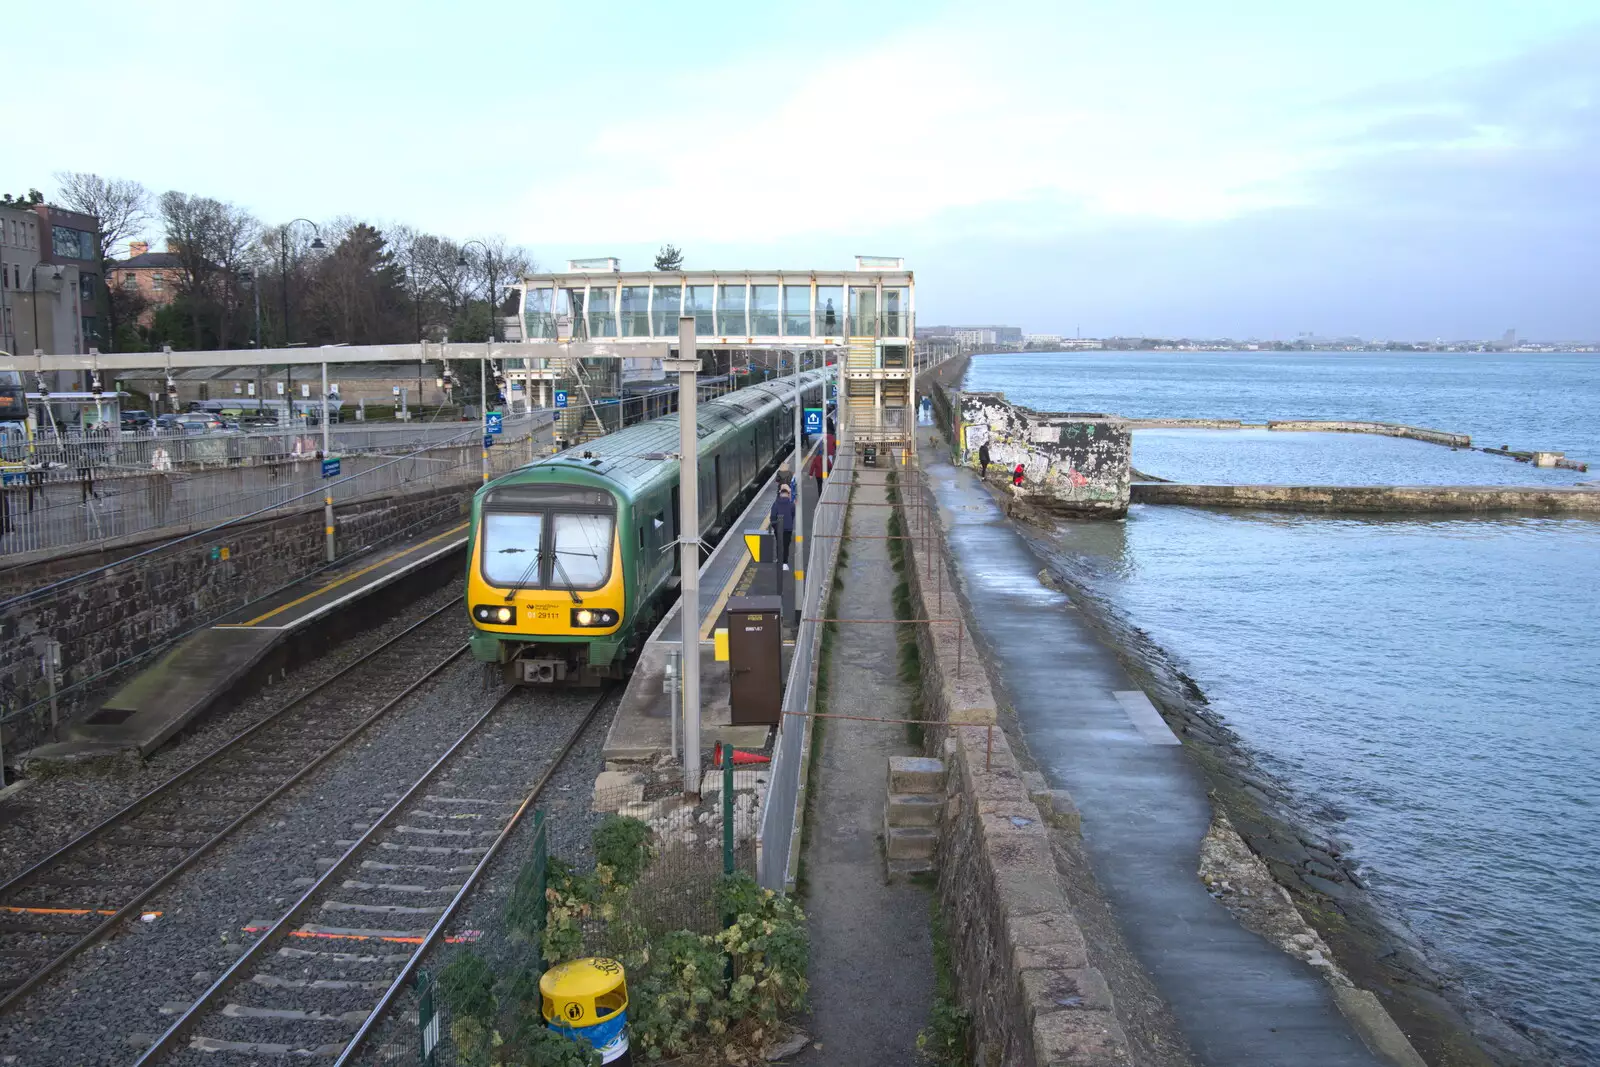 A 29000 Class DMU at Blackrock station, from The Dead Zoo, Dublin, Ireland - 17th February 2023